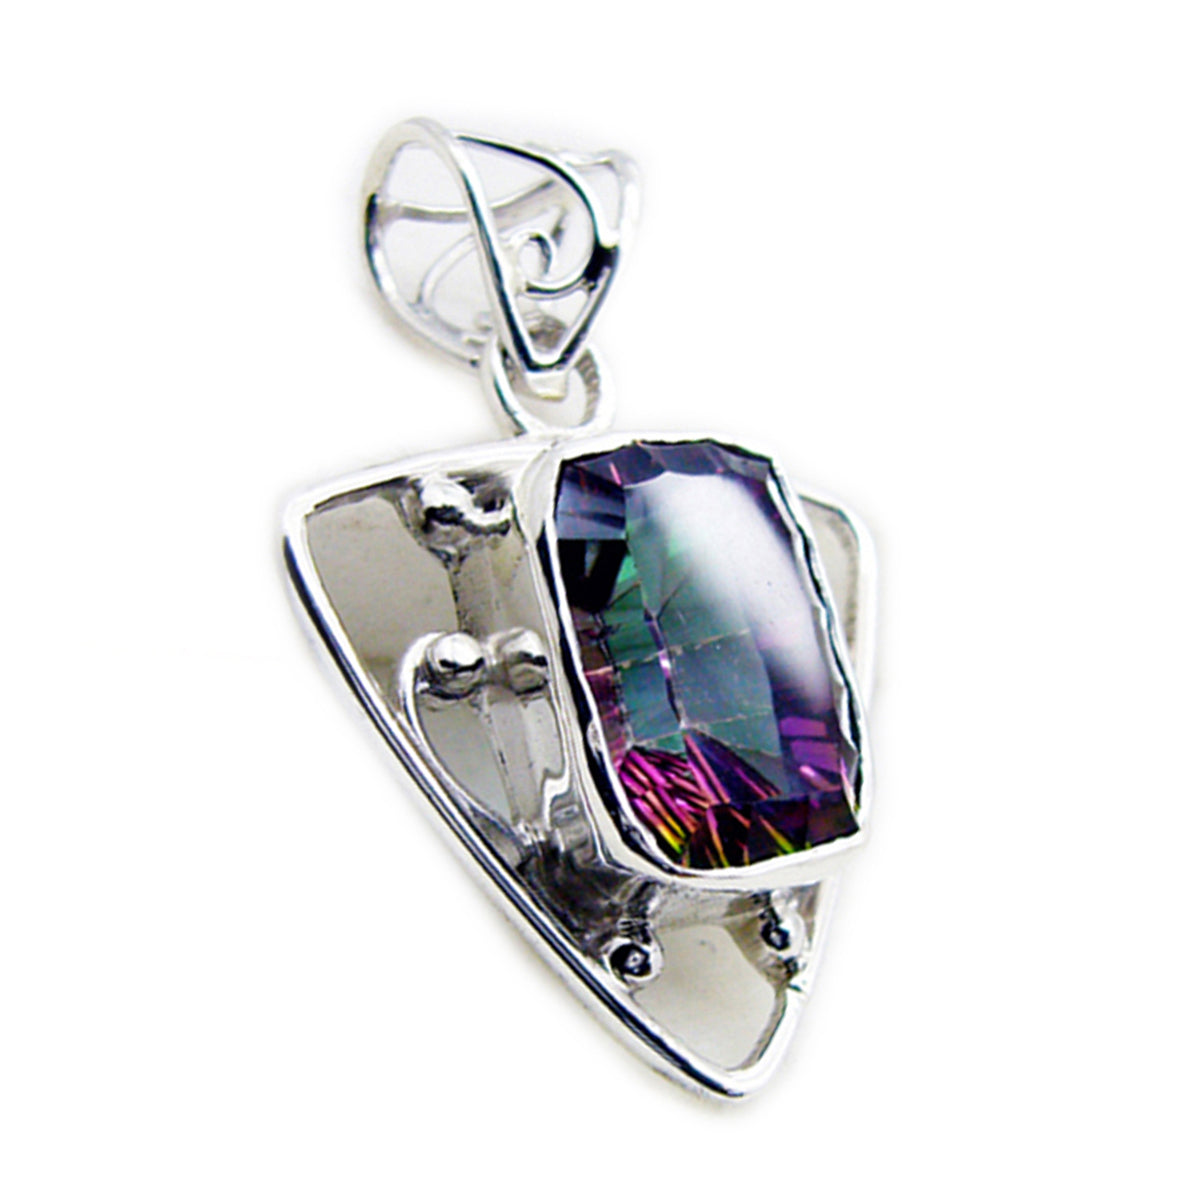 Riyo Alluring Gemstone Octagon Faceted Multi Color Mystic Quartz Sterling Silver Pendant Gift For Christmas